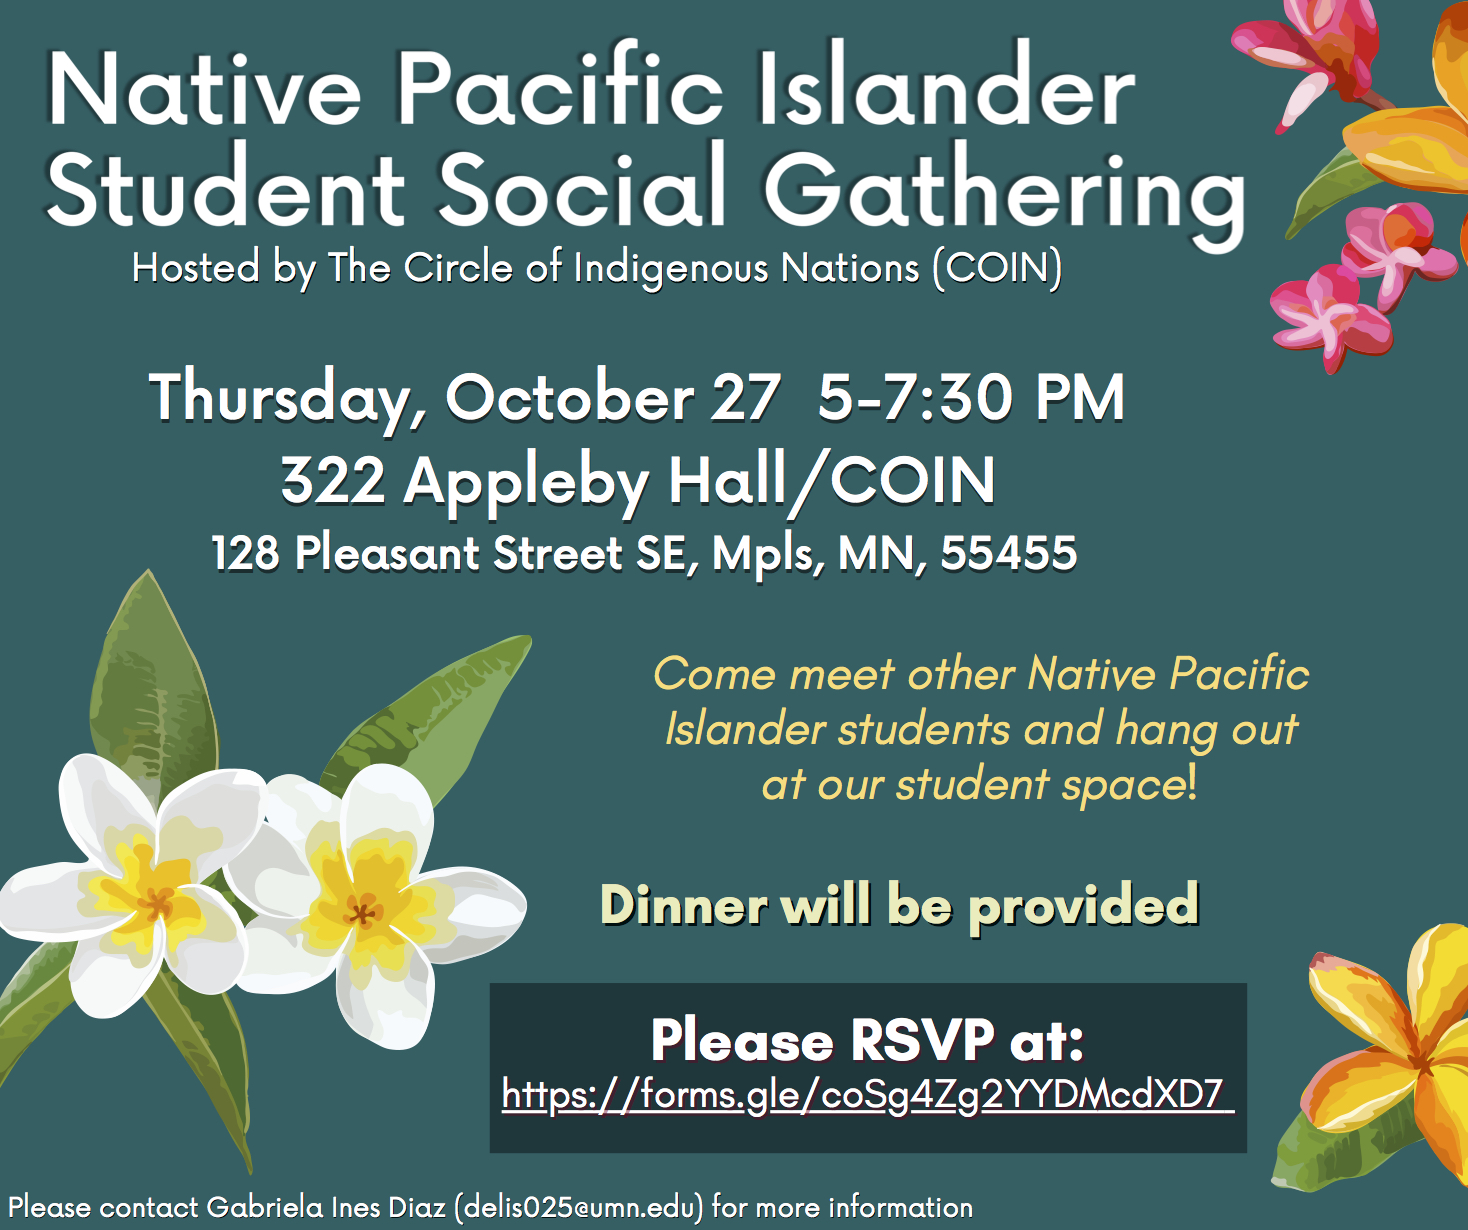 Promotional flyer for a gather/social dinner for Native Pacific Islander students at COIN